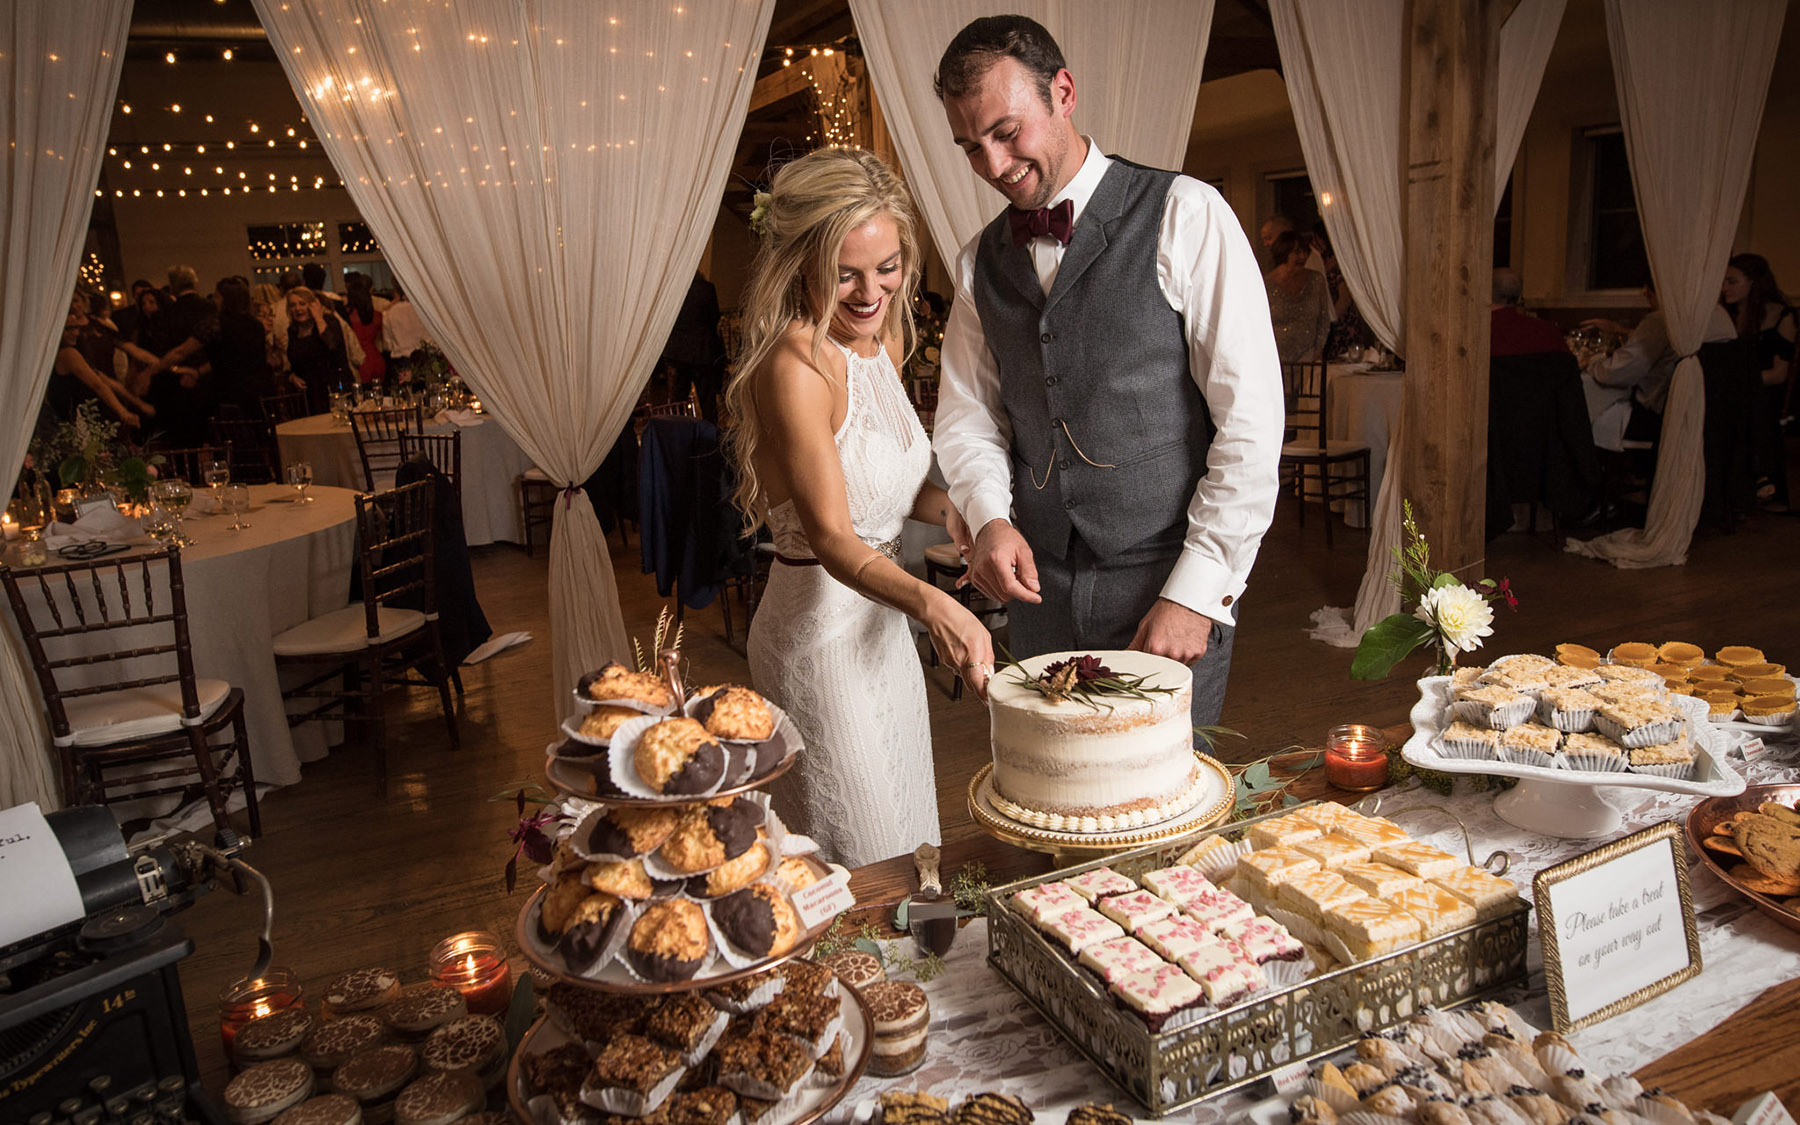 a wedding couple standing in front of a table full of desserts cutting a wedding cake. Drapery and tables visible in the background.